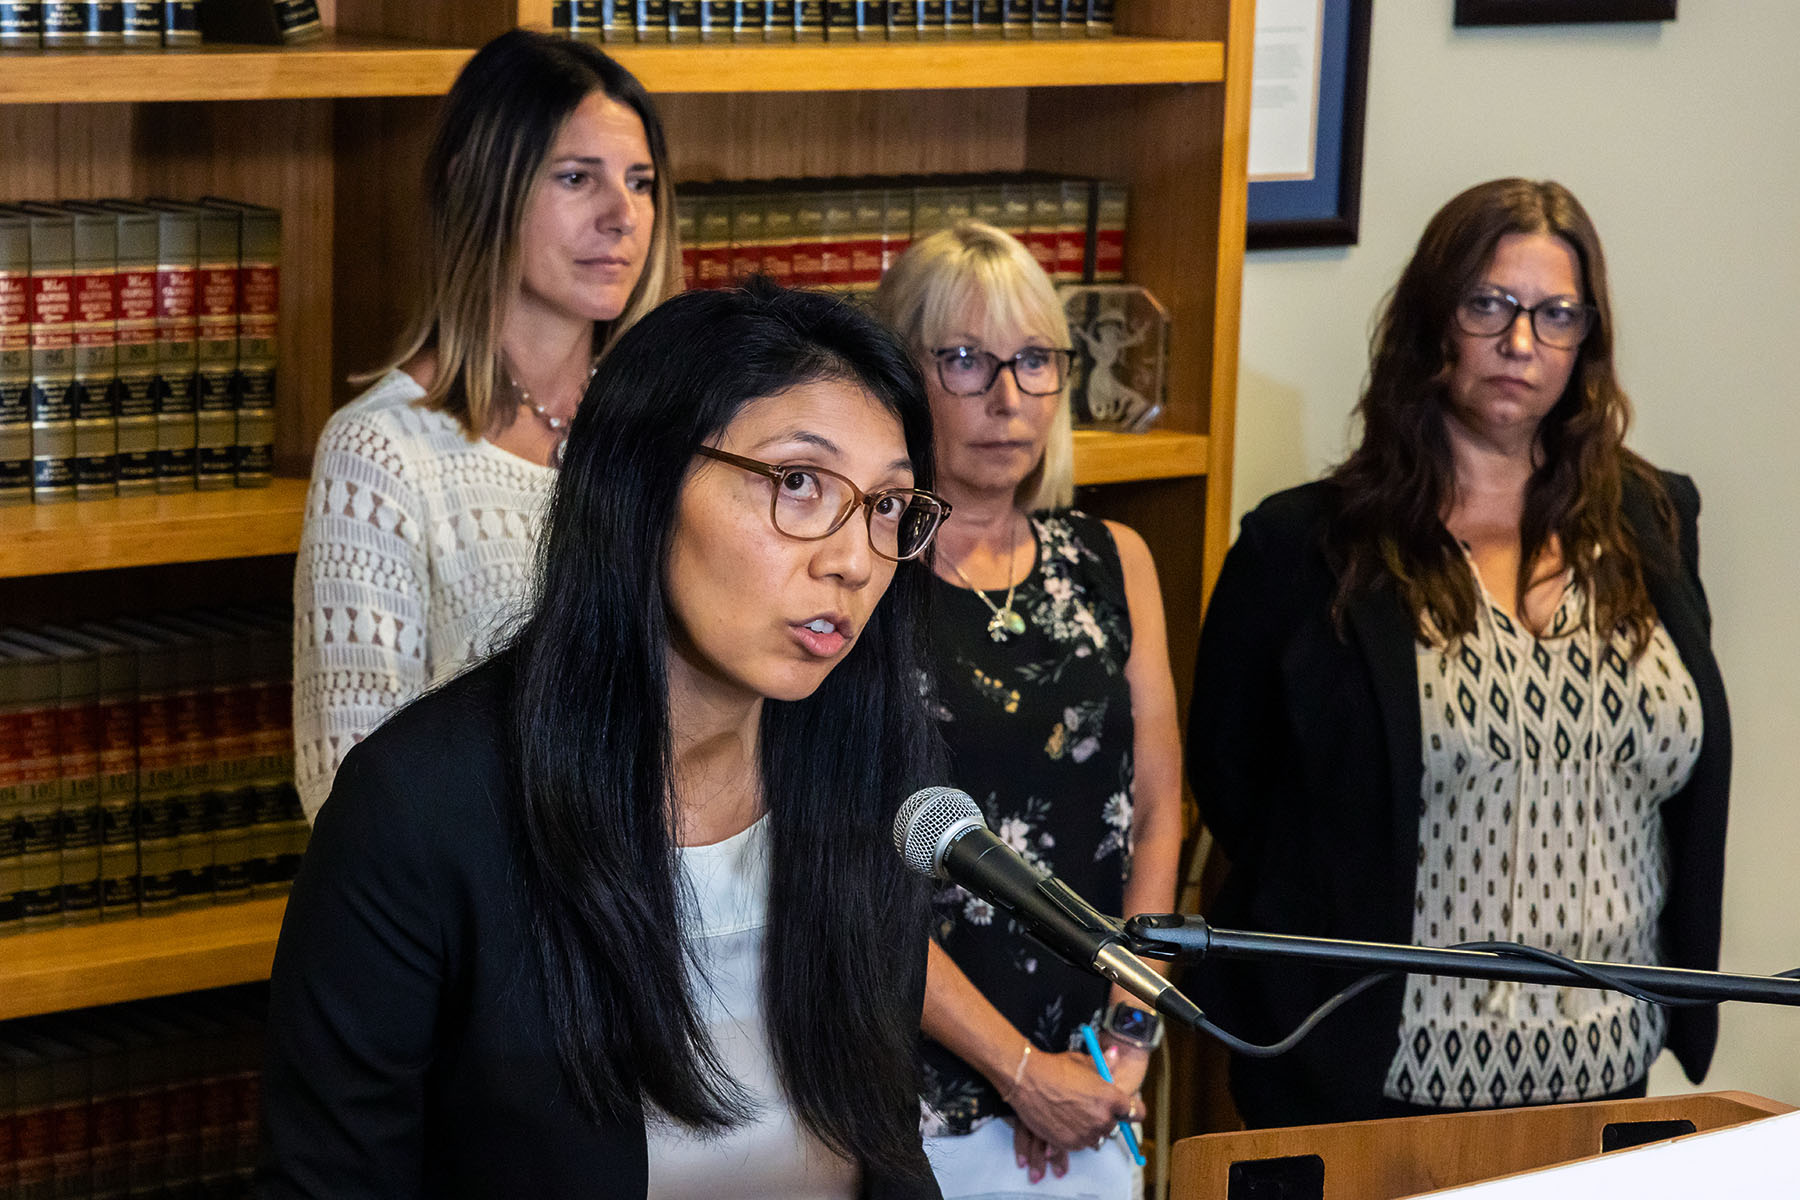 Senior Supervising Attorney Amanda Mangaser Savage makes an announcement about a lawsuit while standing at a podium during a press conference.